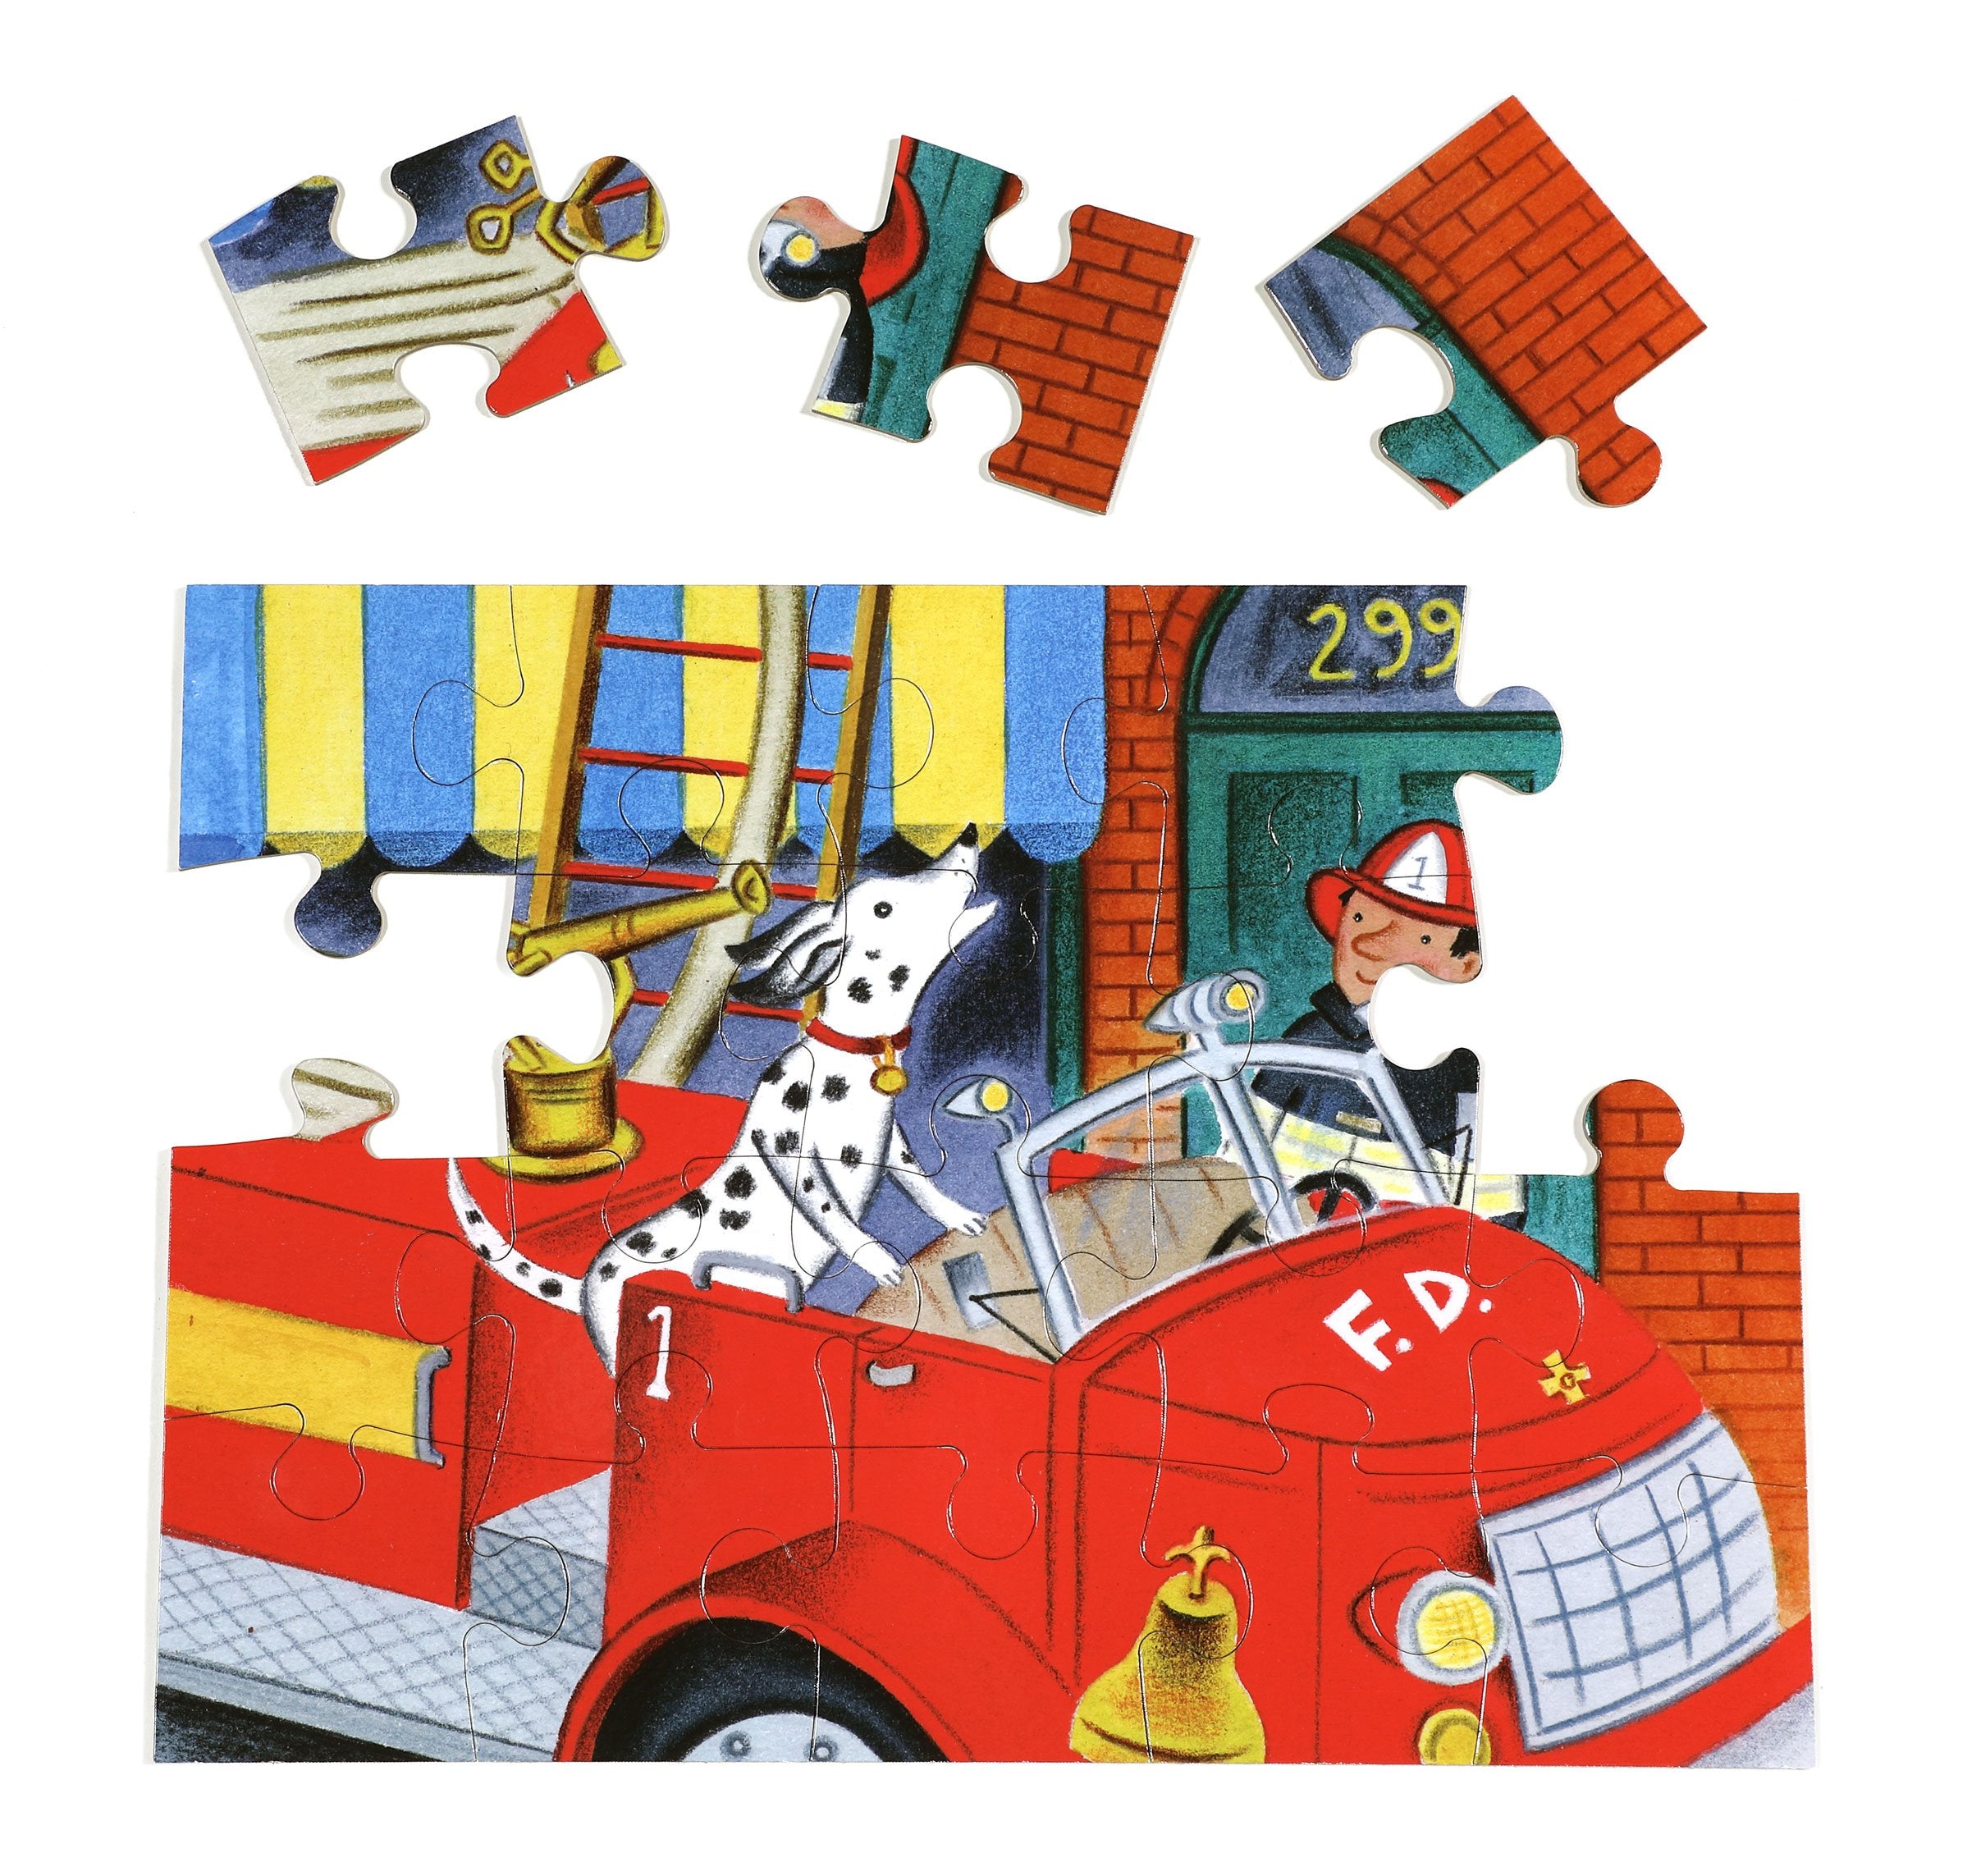 Red Fire Truck 20 Piece Big Puzzle